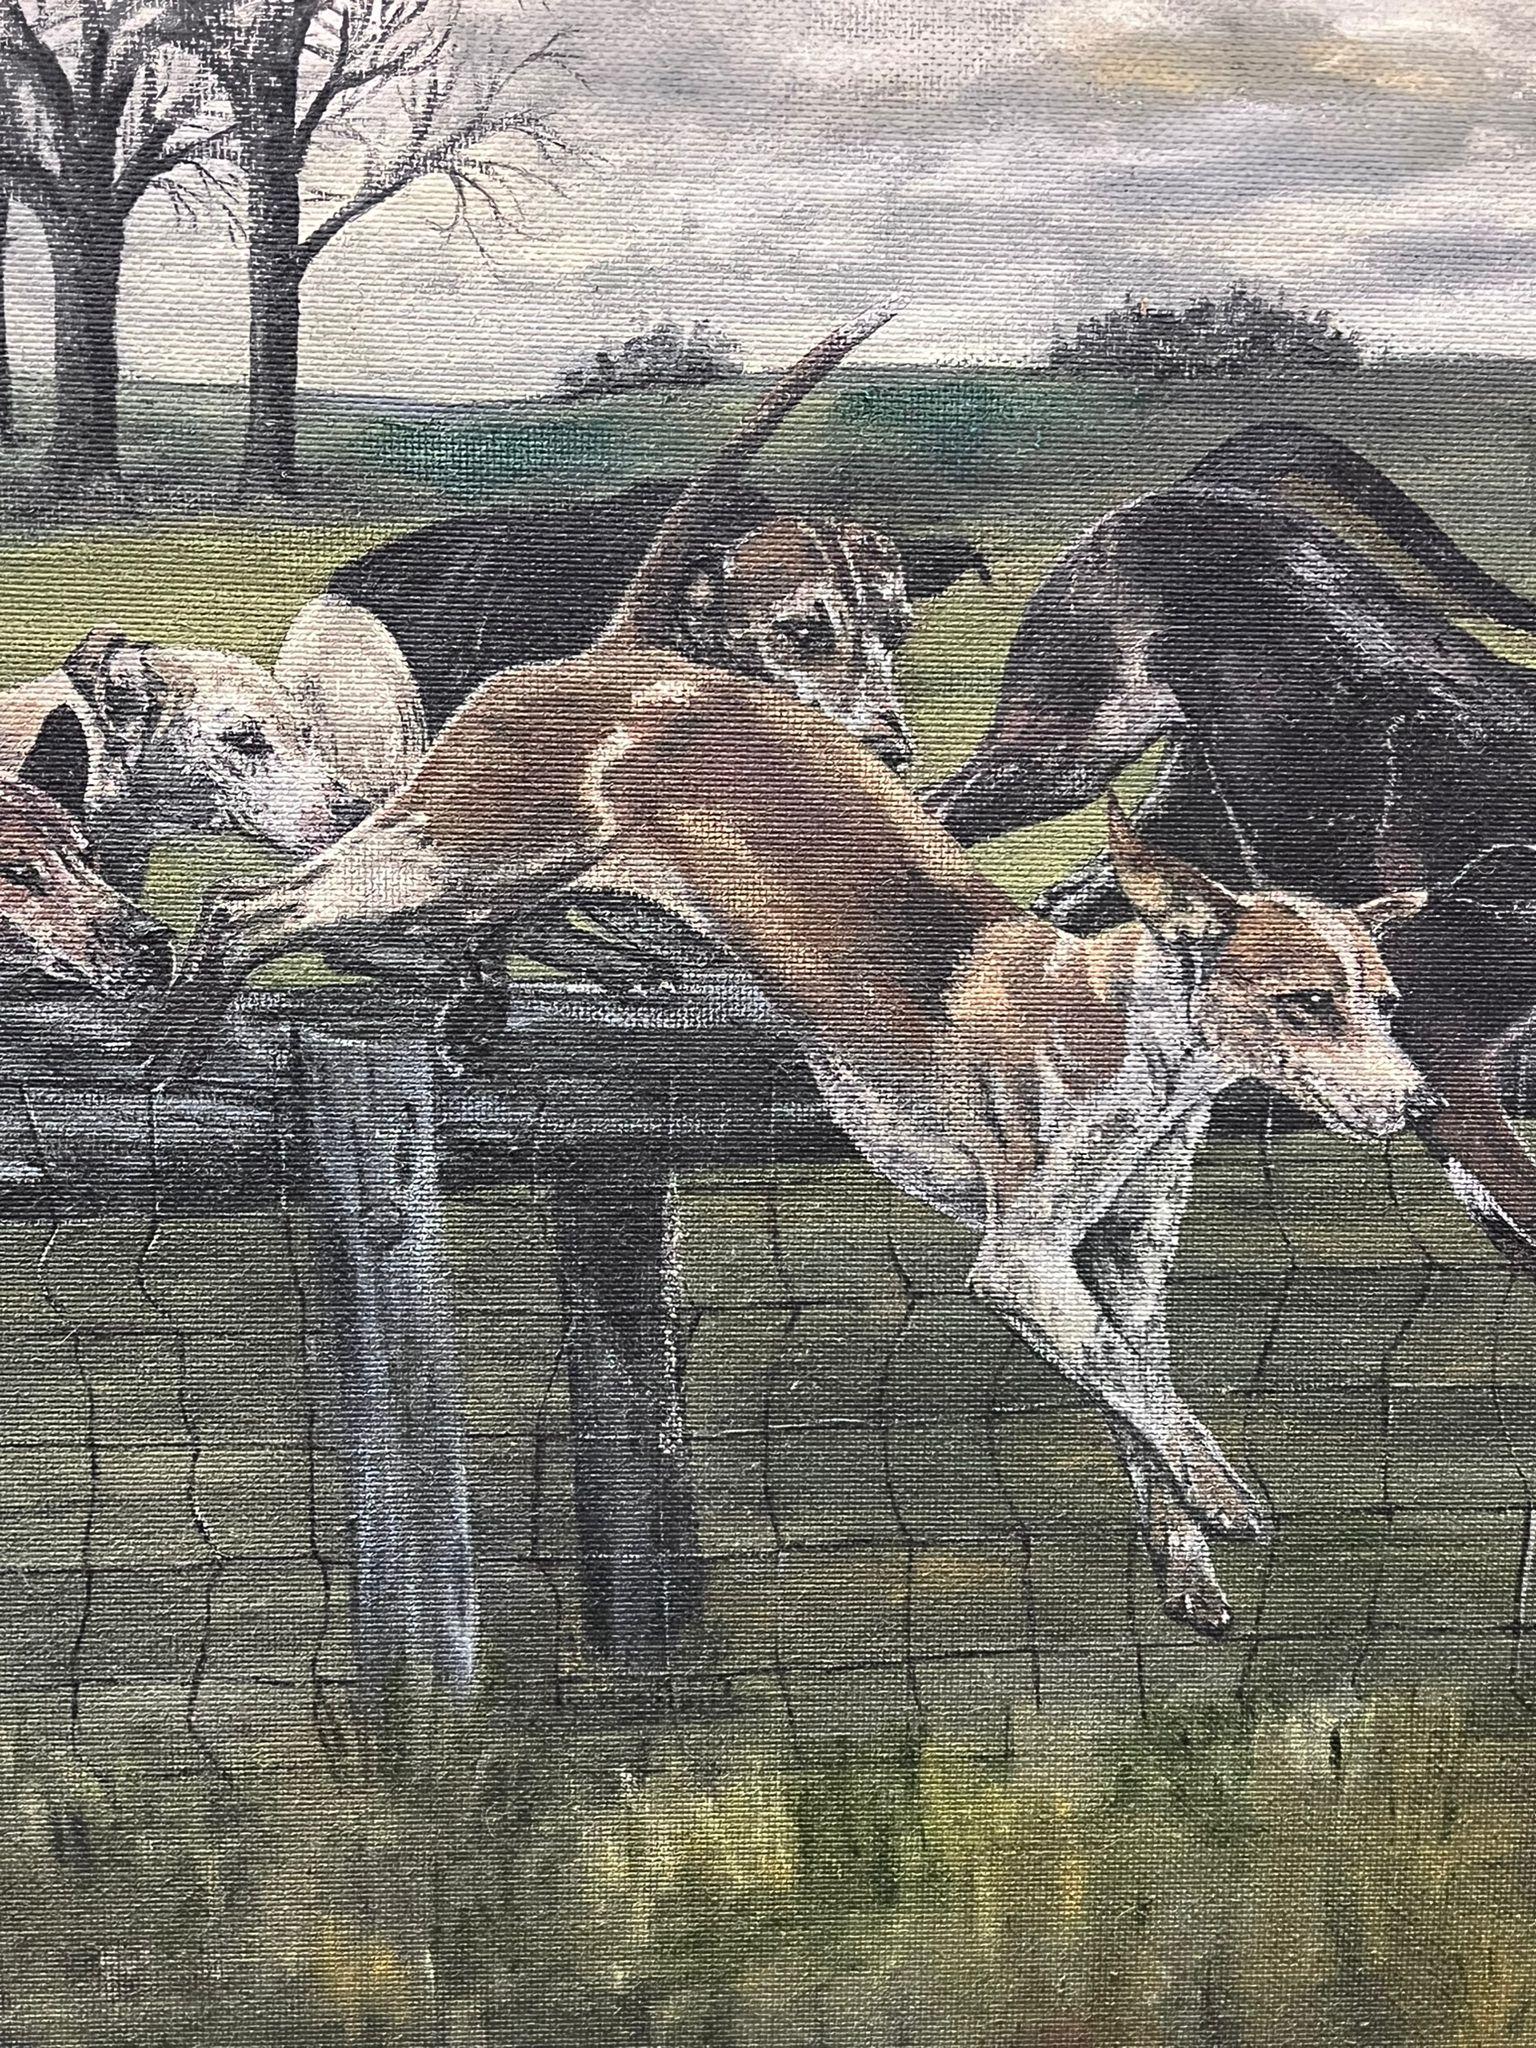 Huge British Sporting Oil Painting Hunting Hounds in Full Pursuit over Fence For Sale 2